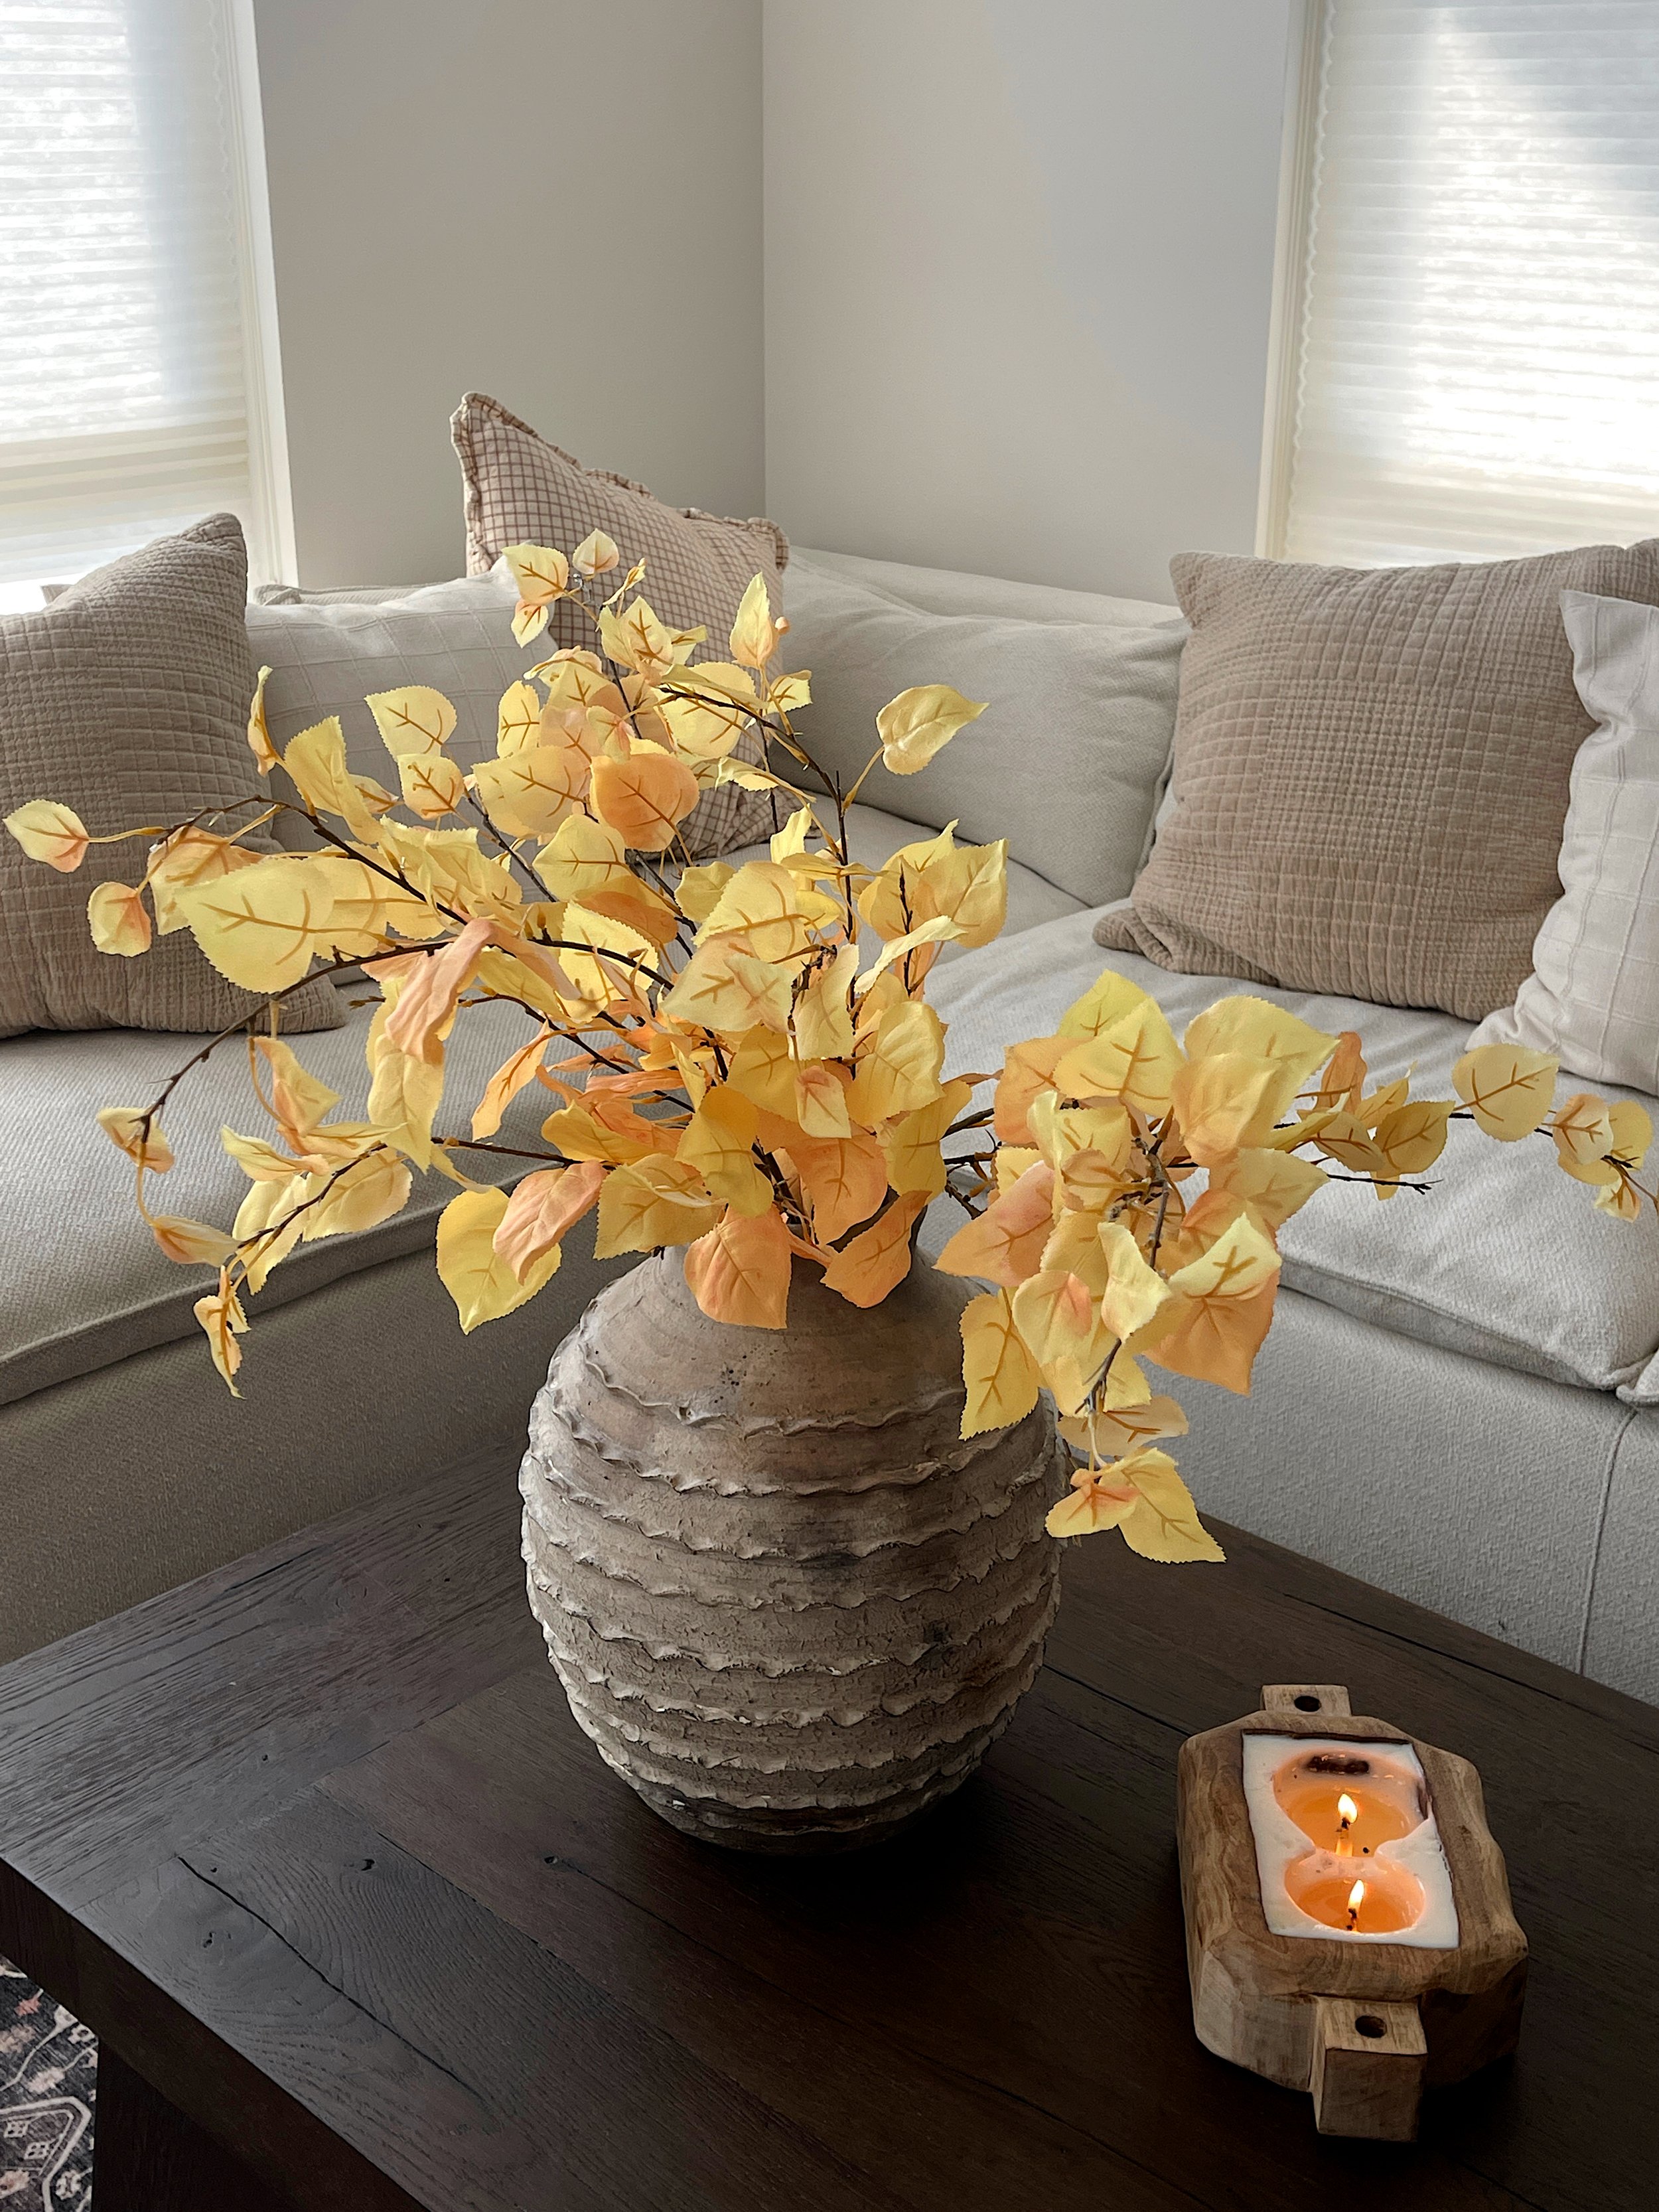 styling a coffee table for fall : home design.JPG